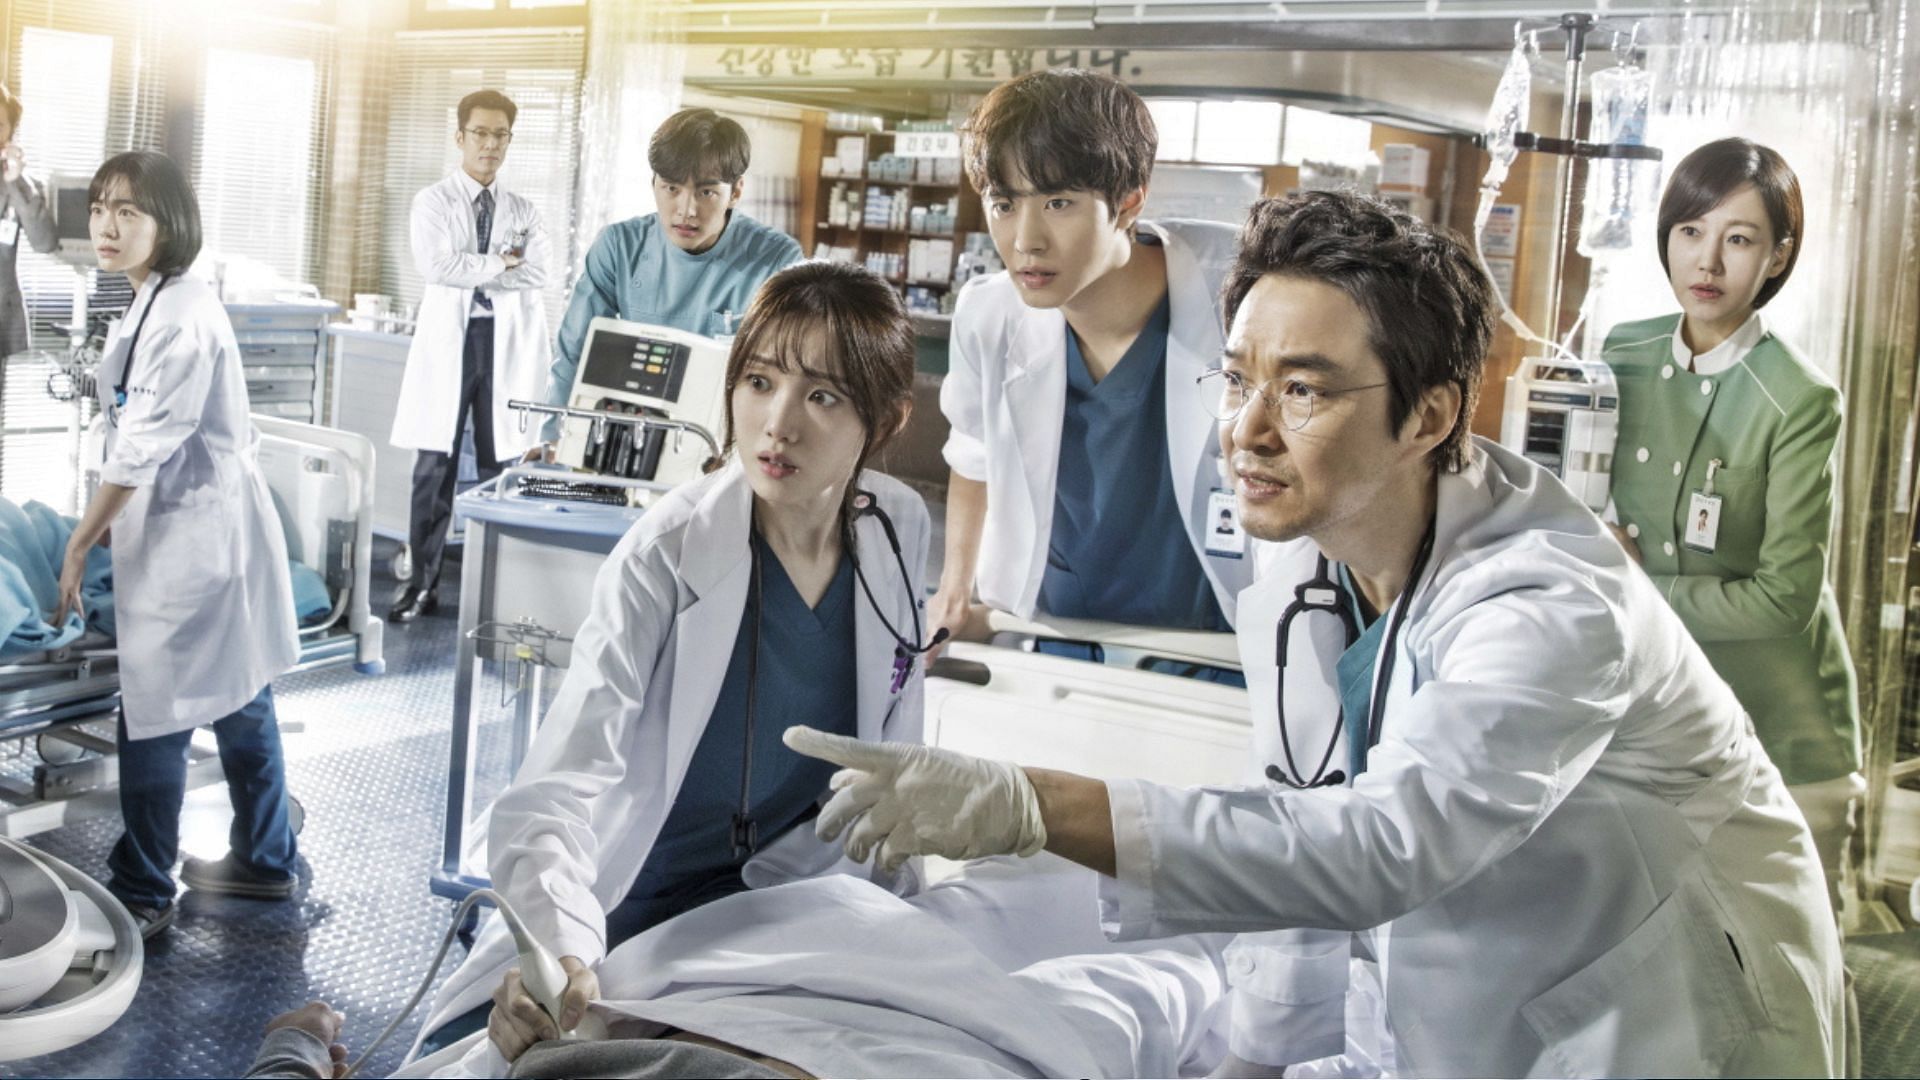 Dr. Romantic 3 all set to return with Season 2